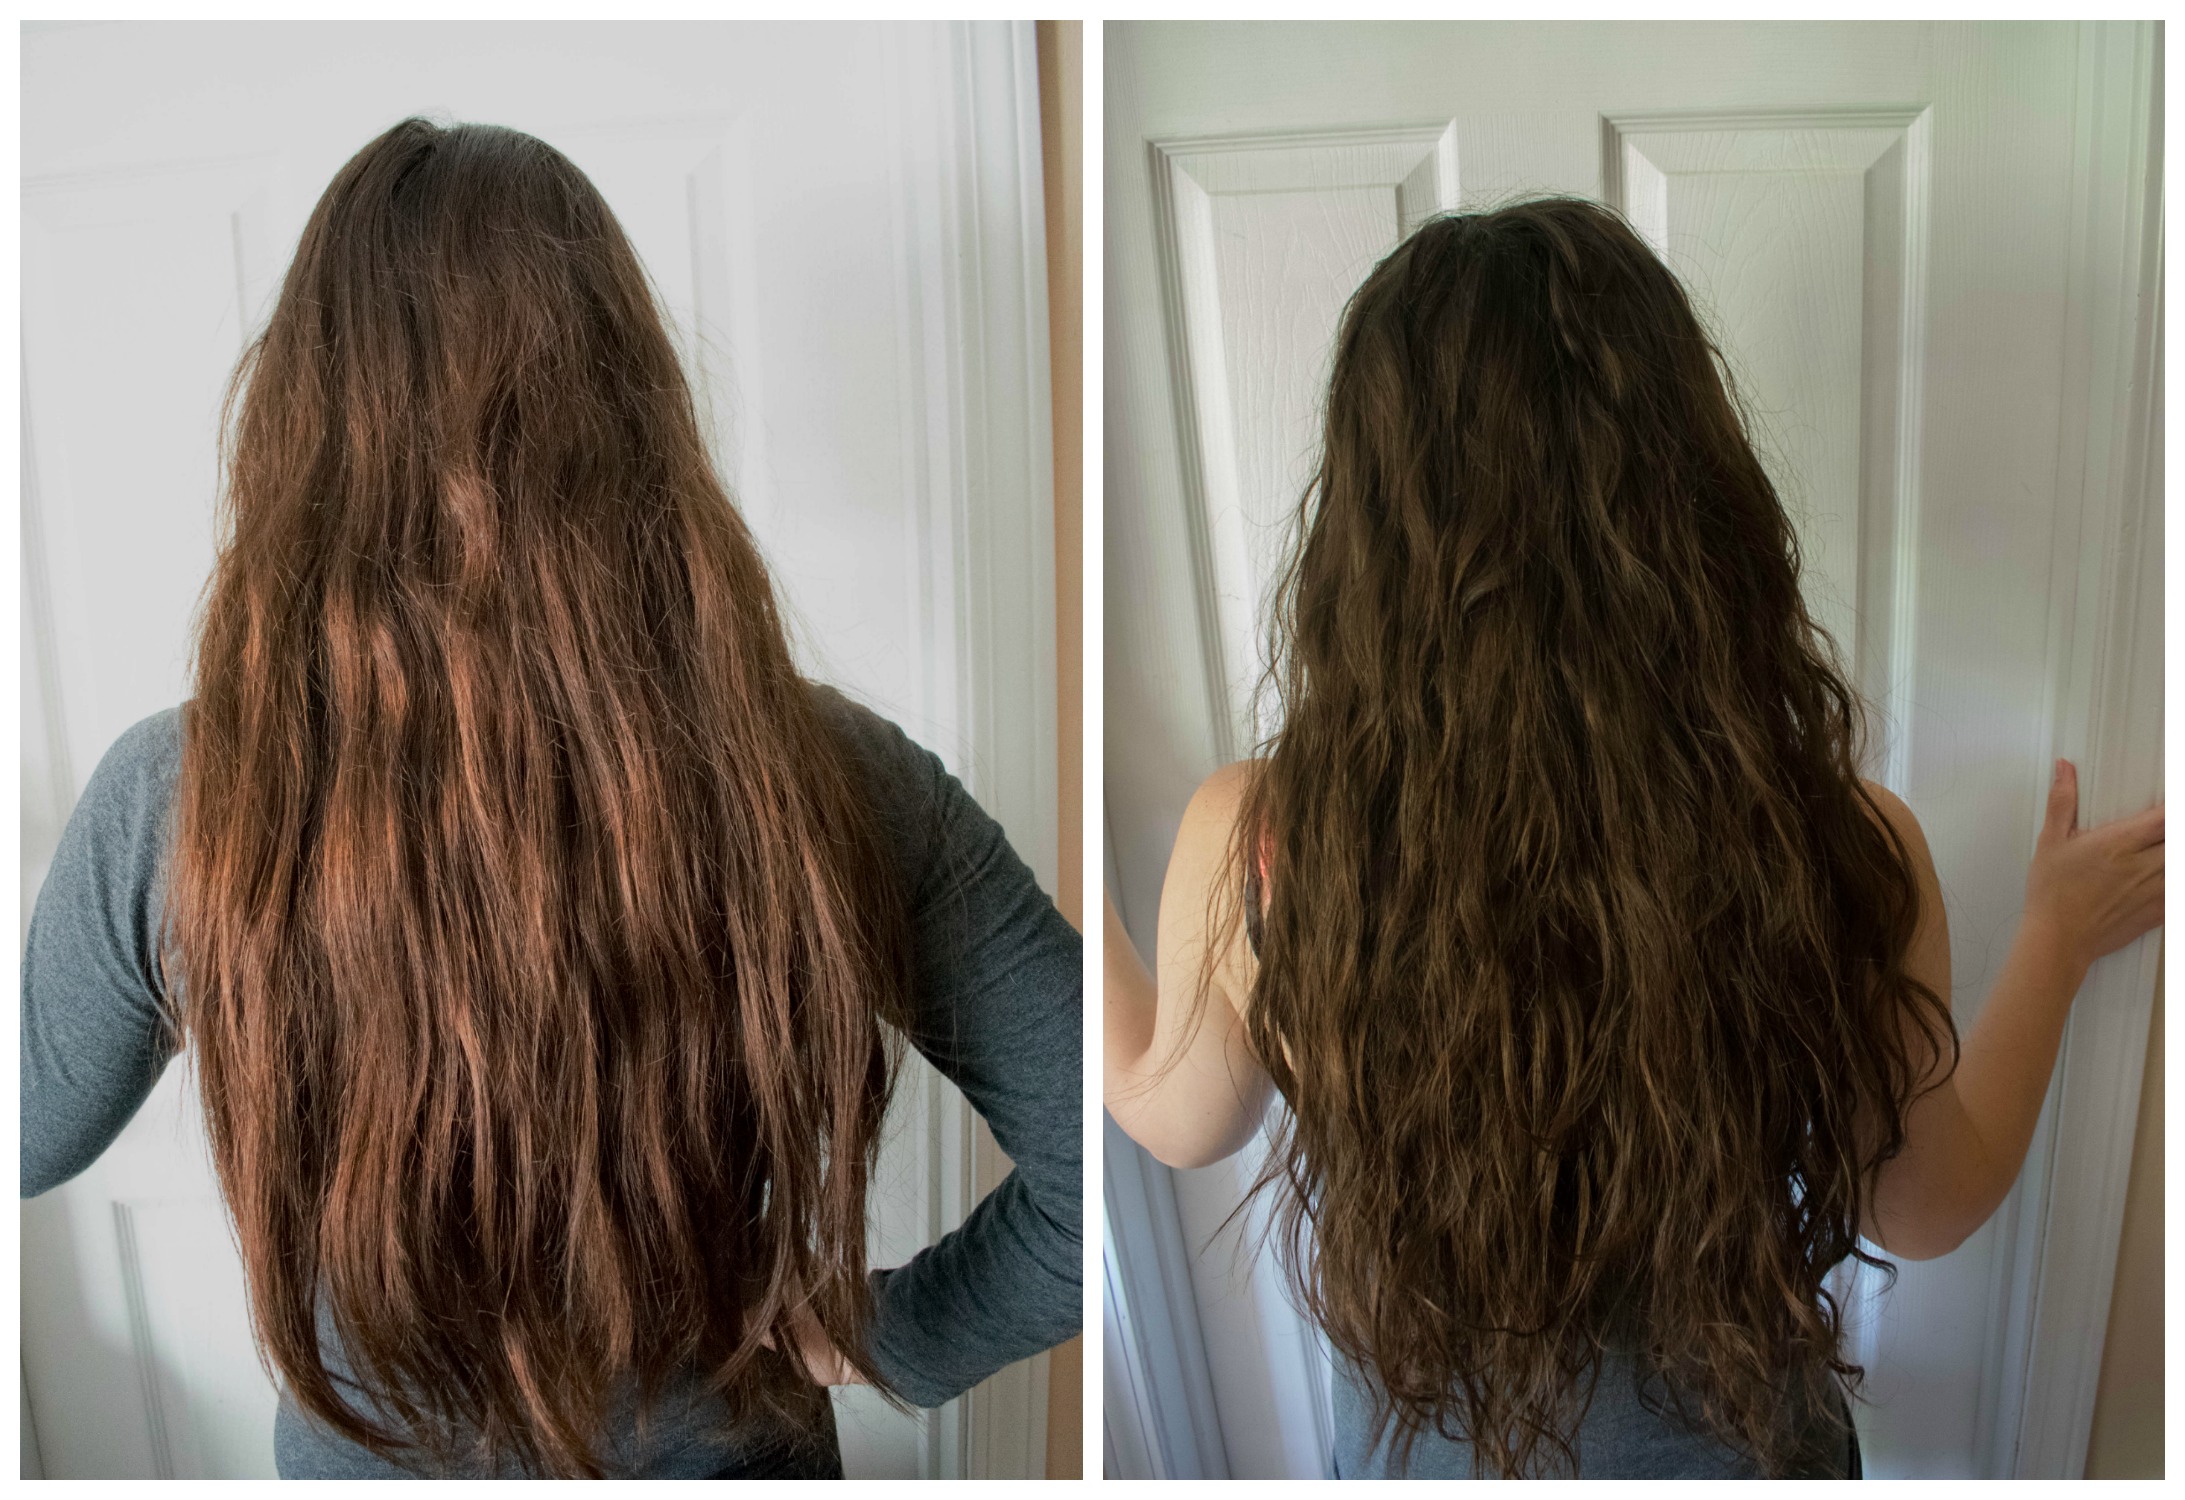 Curly Girl Method Before And After 1 Week Update 2a 2b 2c Wavy Curly Hair Frank Loves Beans 